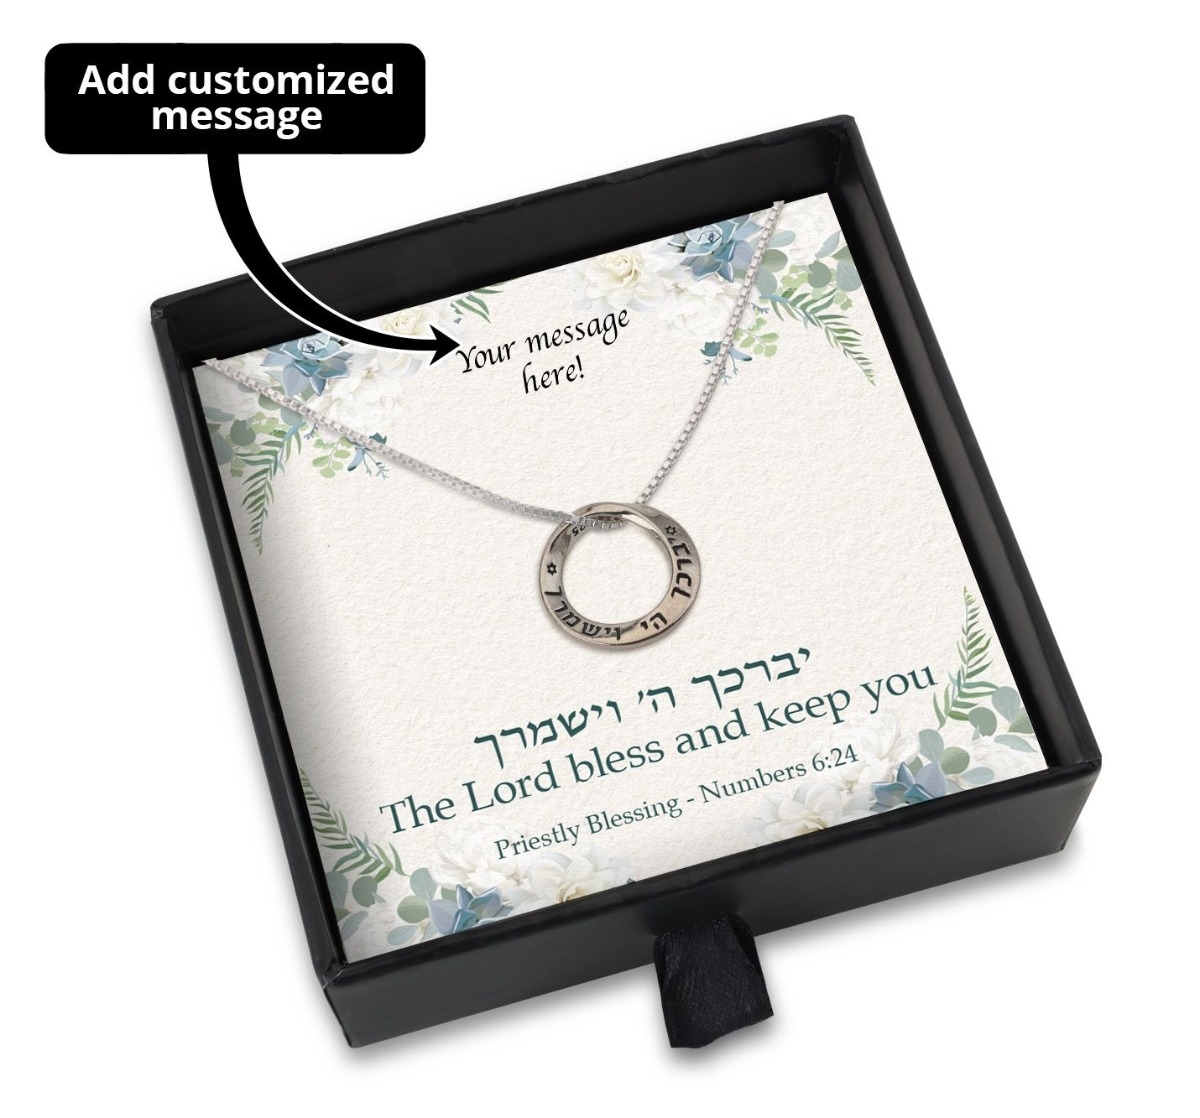 Priestly Blessing Gift Box With Sterling Silver Priestly Blessing Loop Necklace - Add a Personalized Message For Someone Special!!! - 1